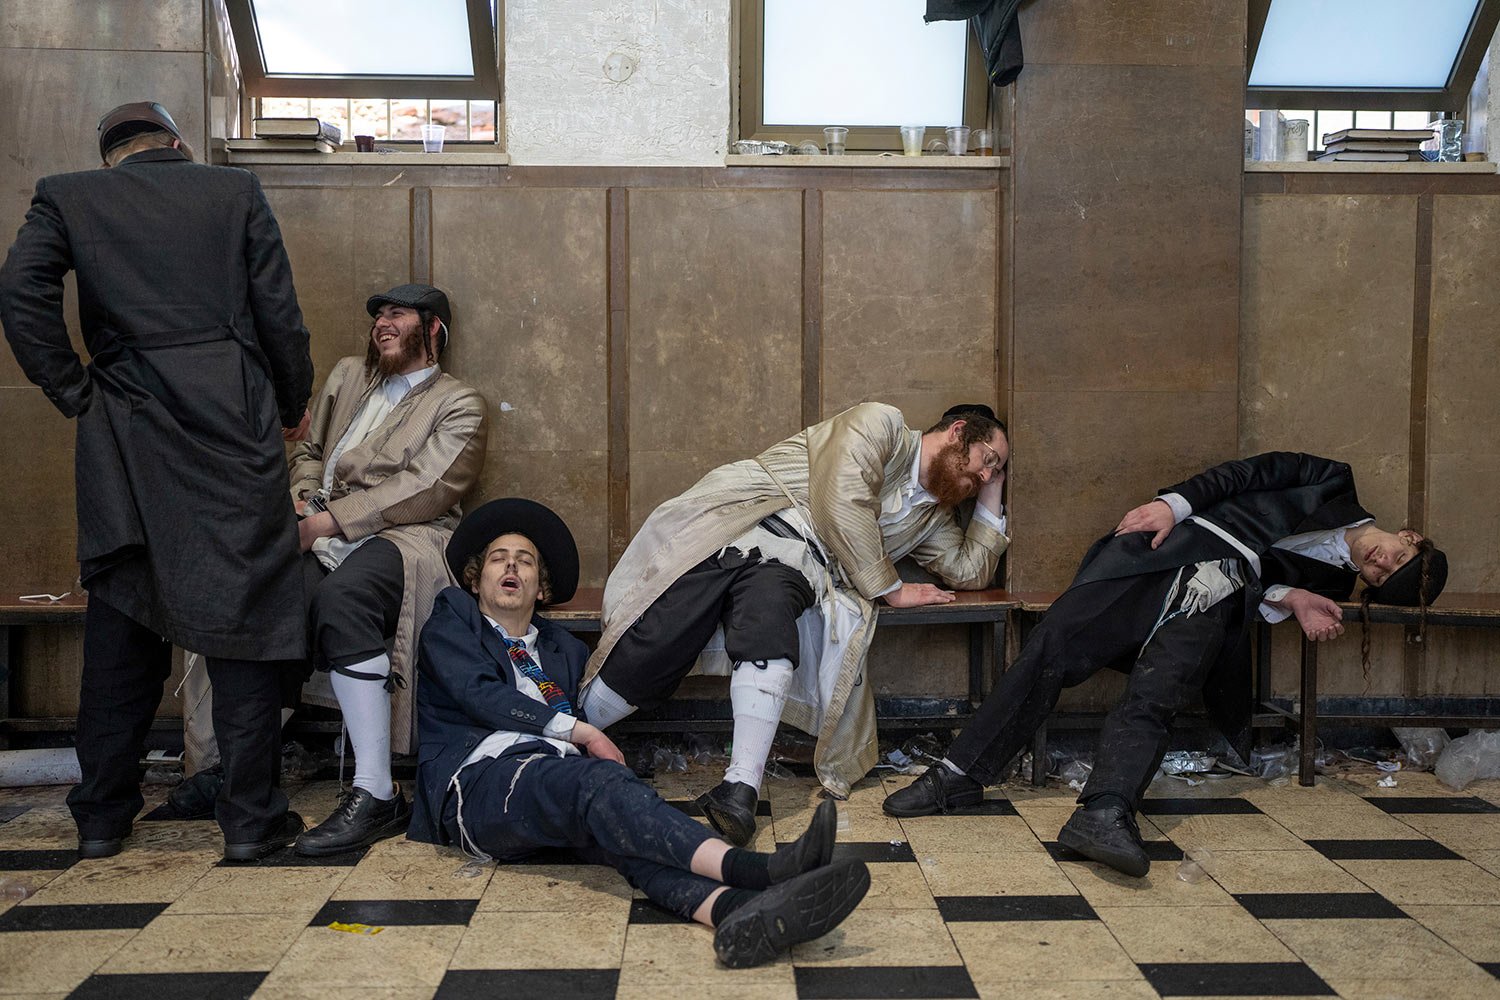  Ultra-orthodox Jewish men rest after getting drunk during celebrations of the Jewish holiday of Purim in Mea Shearim ultra-Orthodox neighborhood in Jerusalem, Wednesday, March 8, 2023. (AP Photo/Ohad Zwigenberg) 